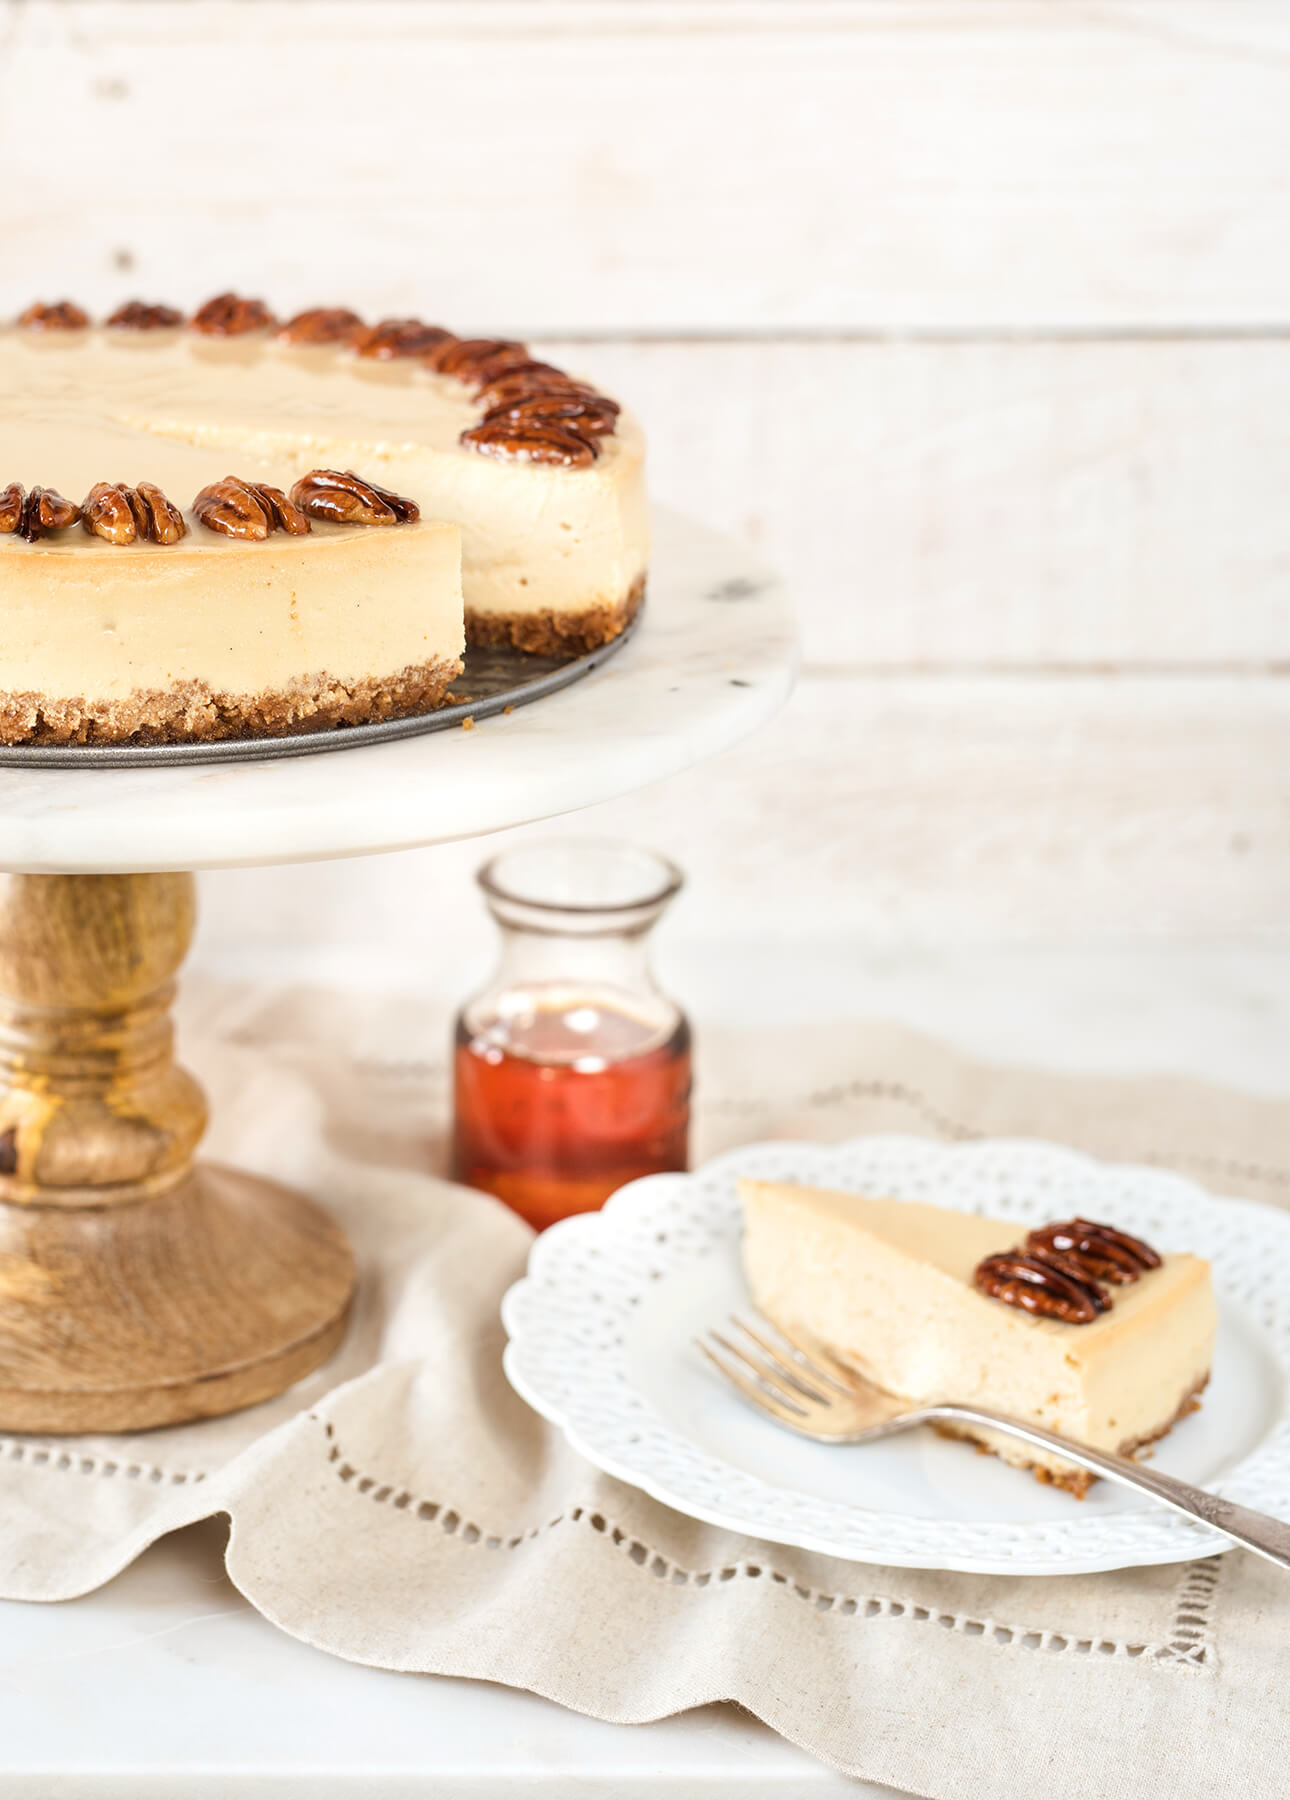 Better-for-You Maple Cheesecake // FoodNouveau.com